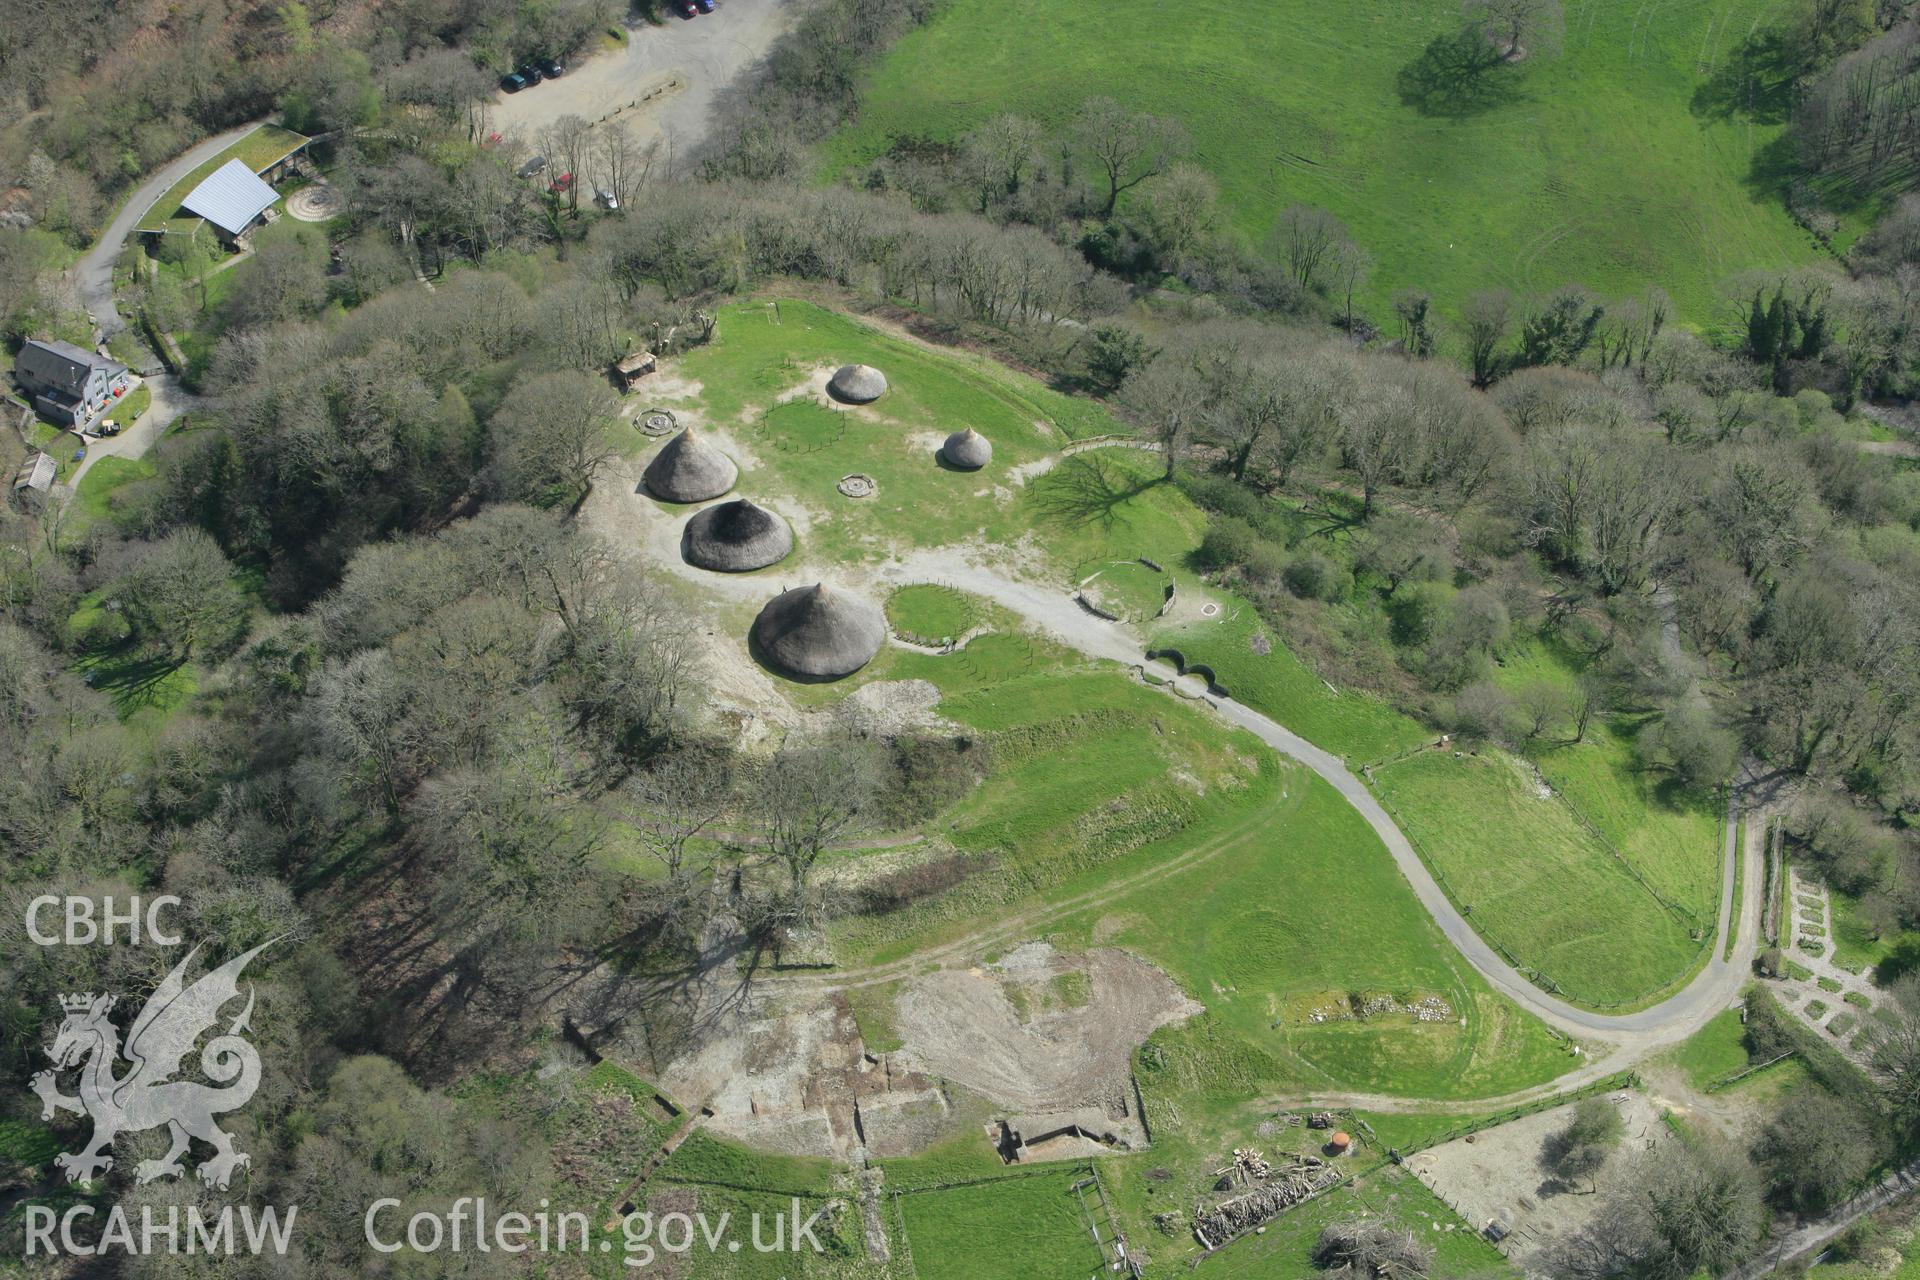 RCAHMW colour oblique photograph of Castell Henllys. Taken by Toby Driver on 24/04/2008.